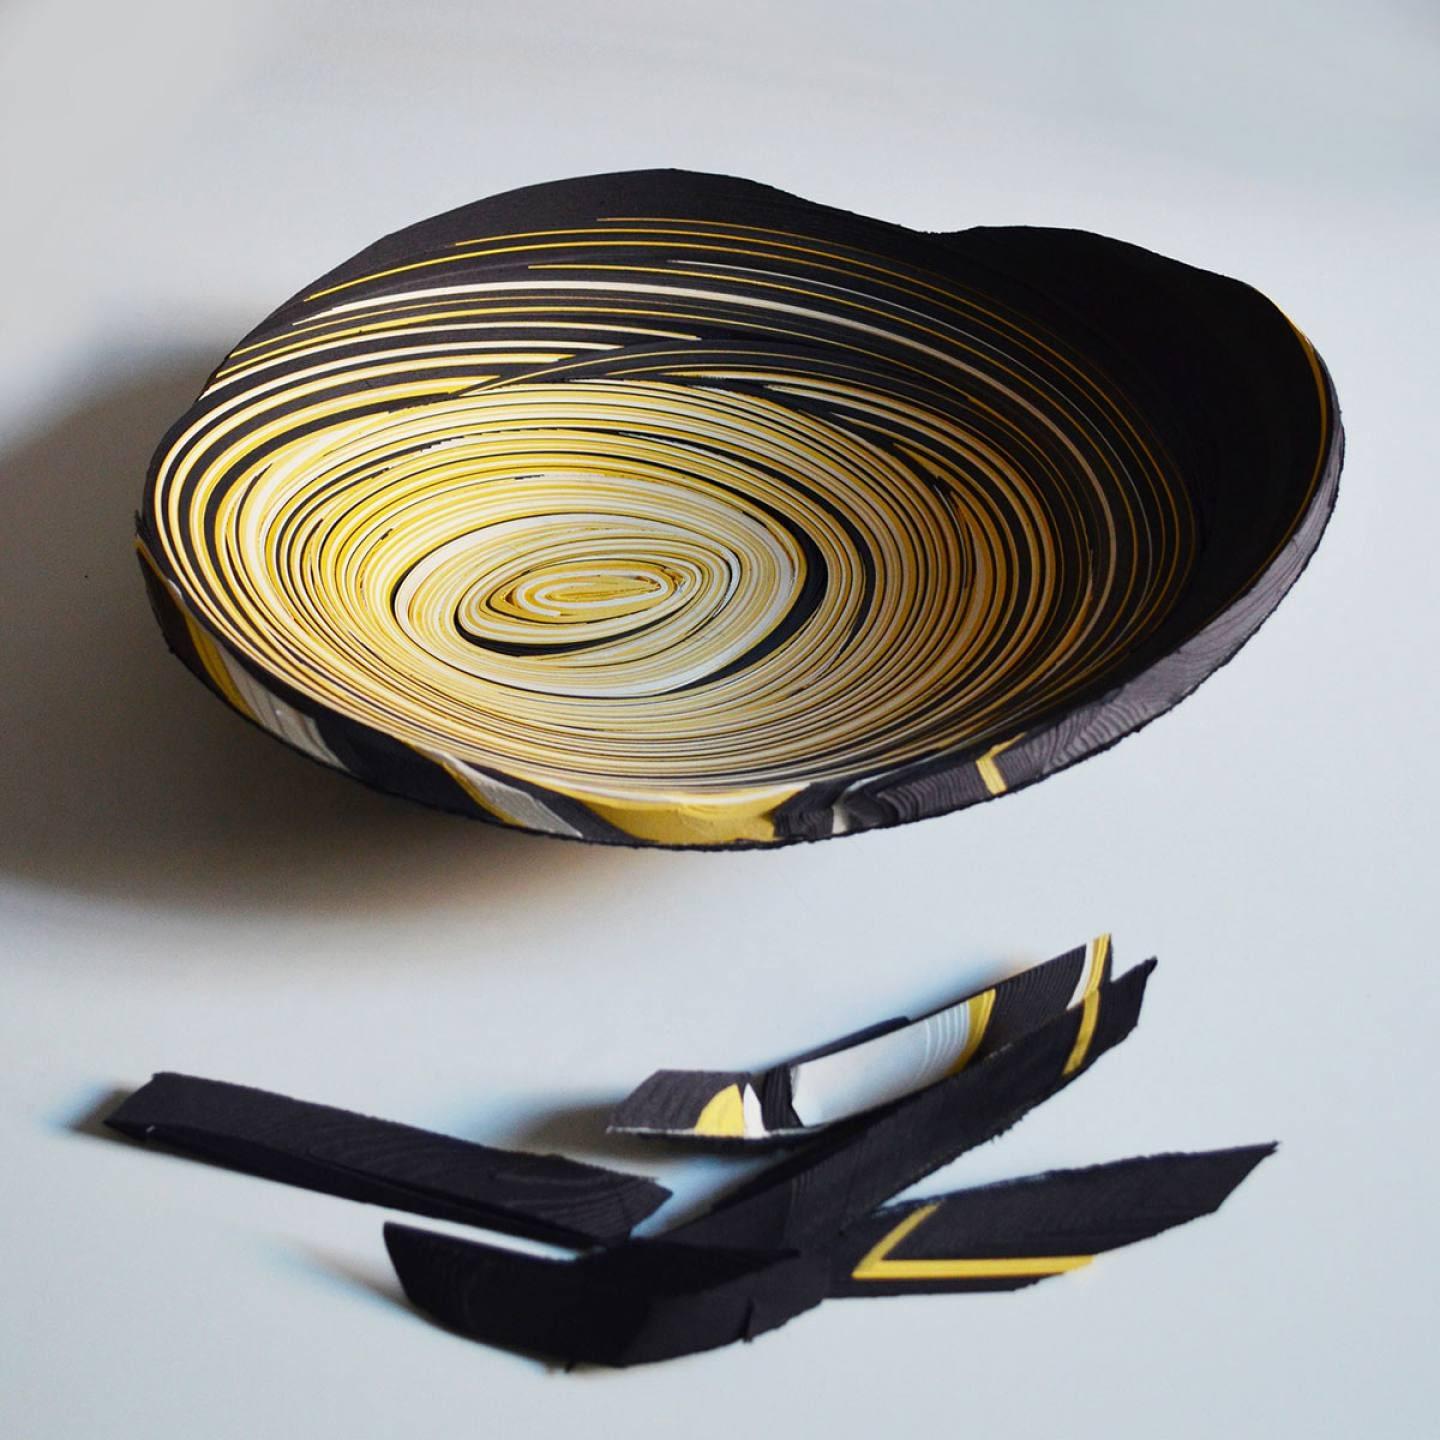 Sculptural plate in a laminated concave, composed of strips of cardboard selected for colour and density. Strips of black and yellow cardboard joined to form rings, which are then cut manually to create unique shapes.
Signed by the